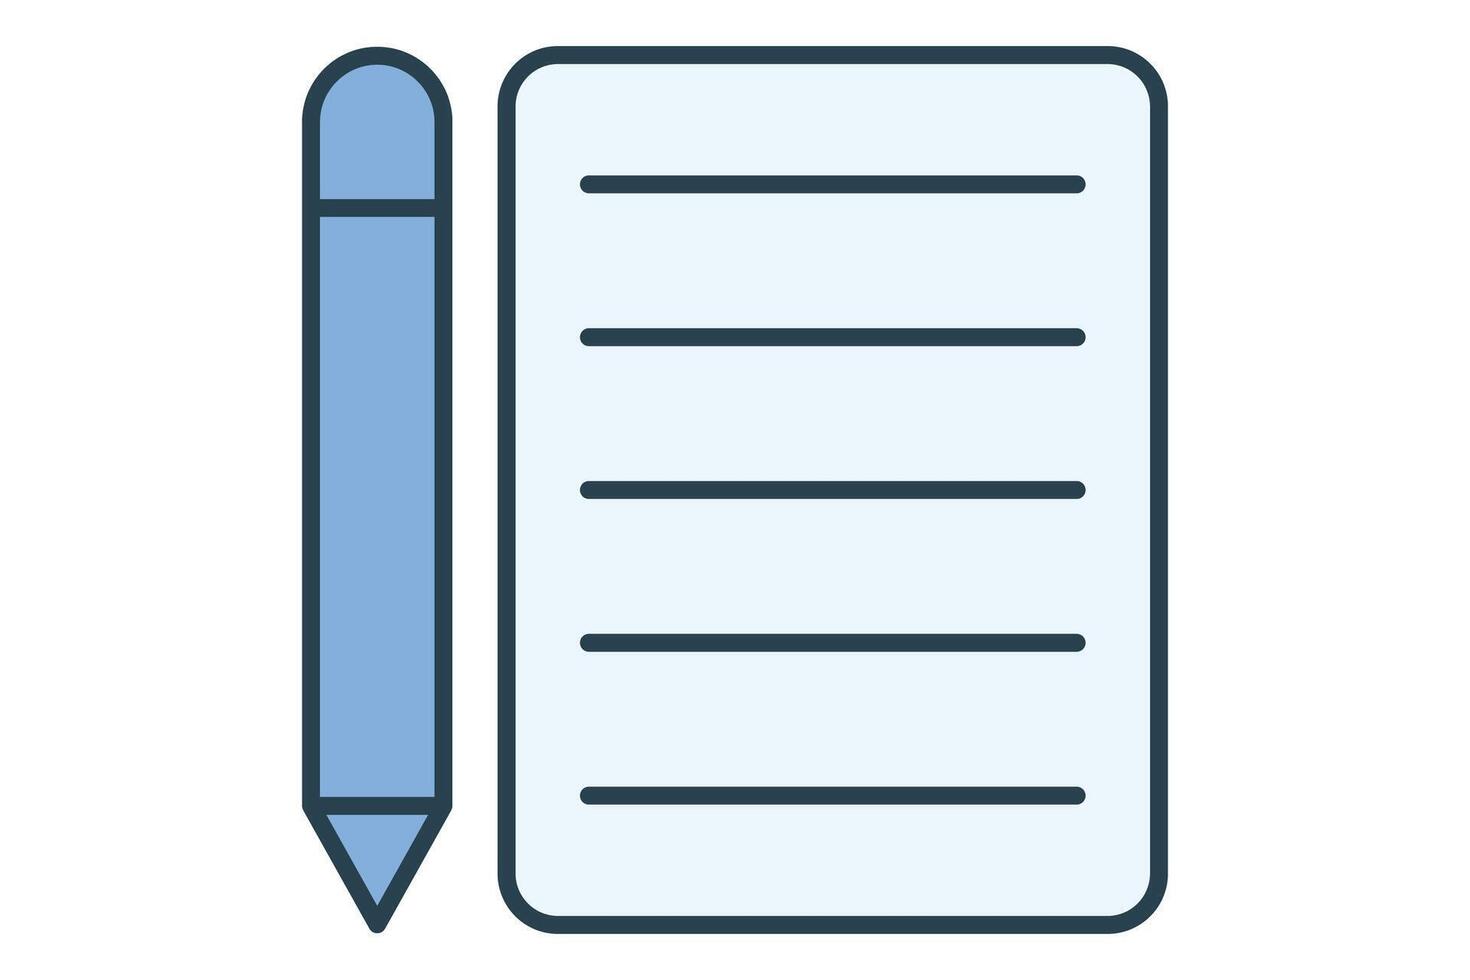 Pencil and Notepad icon. icon related to lesson planning and note-taking. flat line icon style. element illustration vector